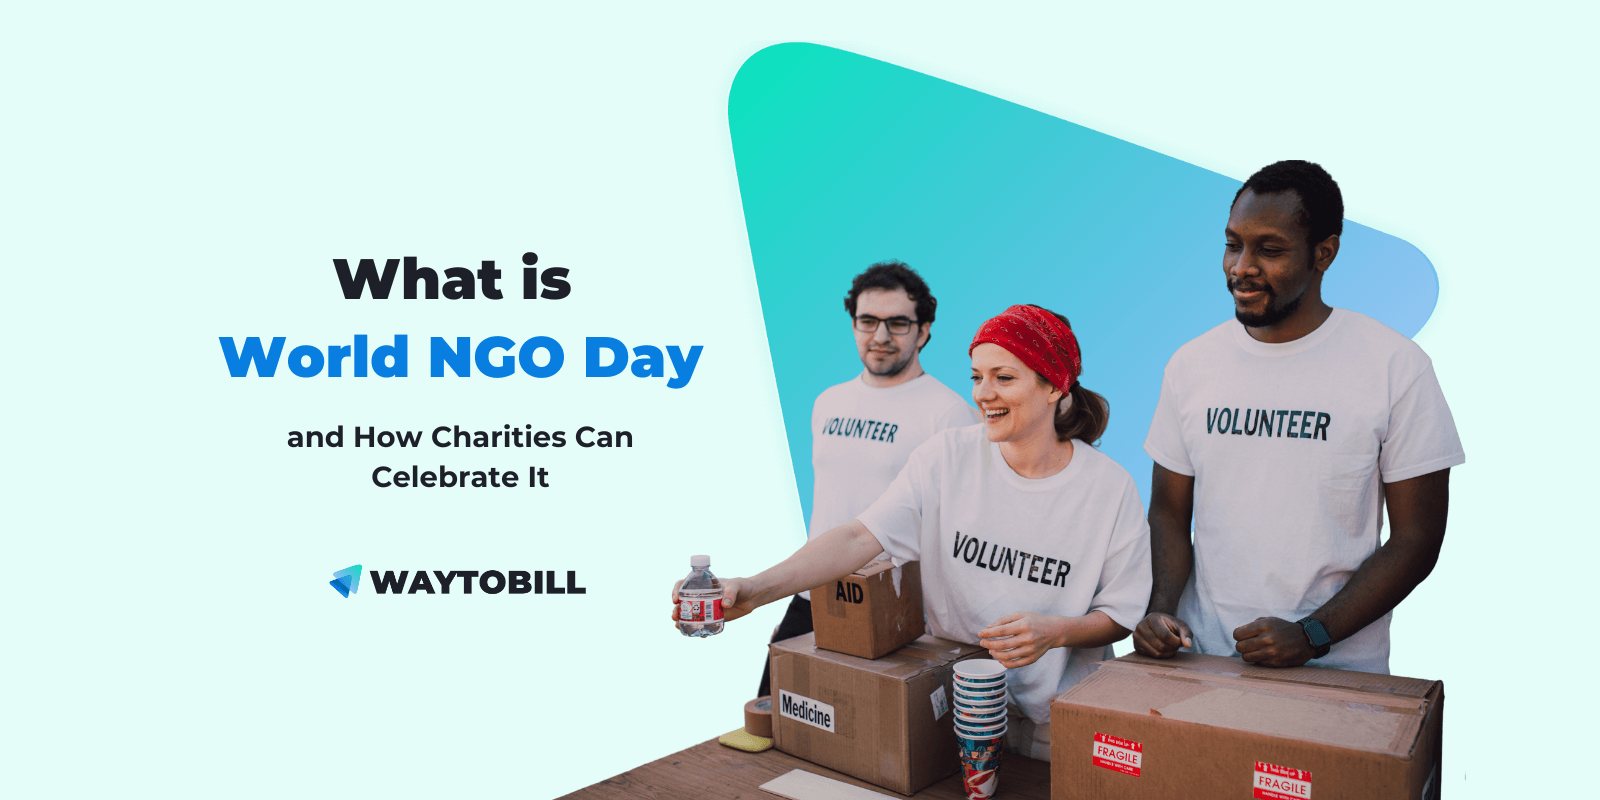 What is World NGO Day and How Charities Can Celebrate It